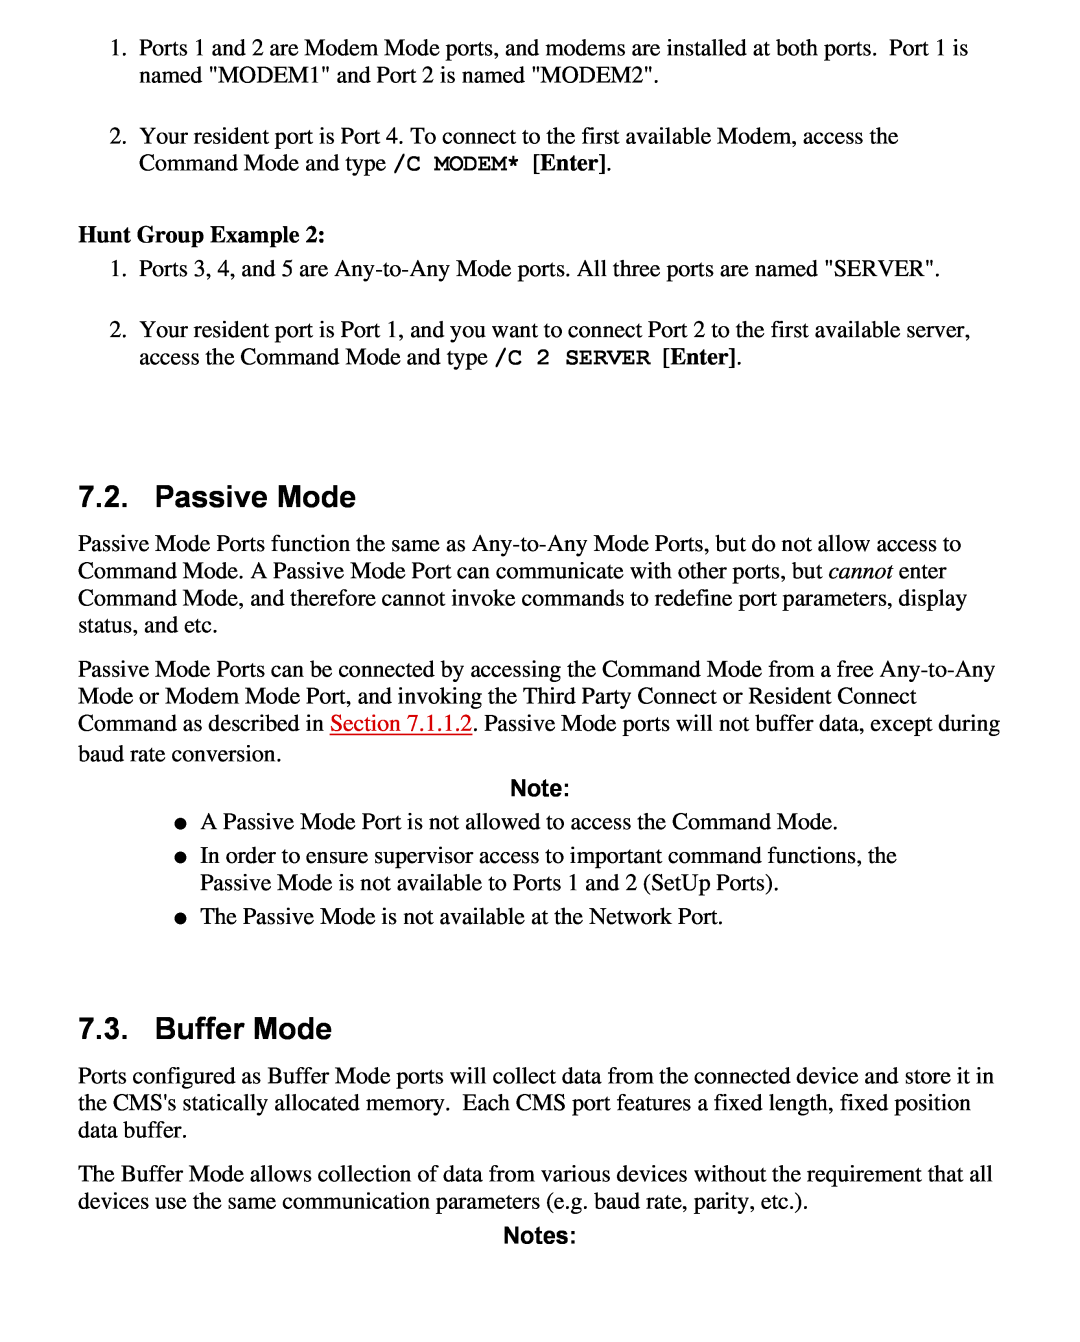 Western Telematic CMS-16 manual Passive Mode, Buffer Mode, Hunt Group Example 